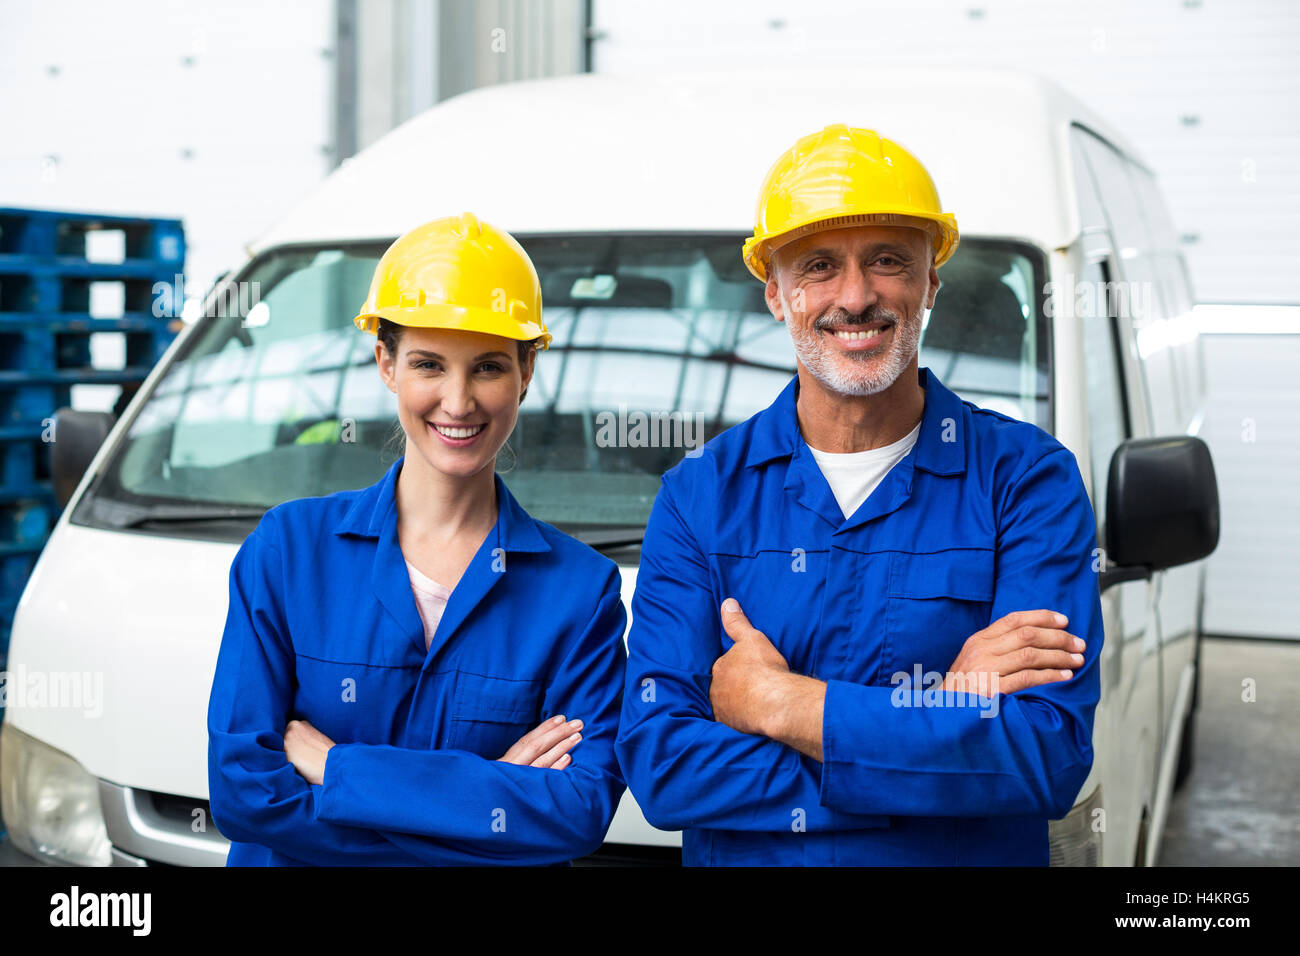 Portrait of warehouse workers standing together with arms crossed Stock Photo